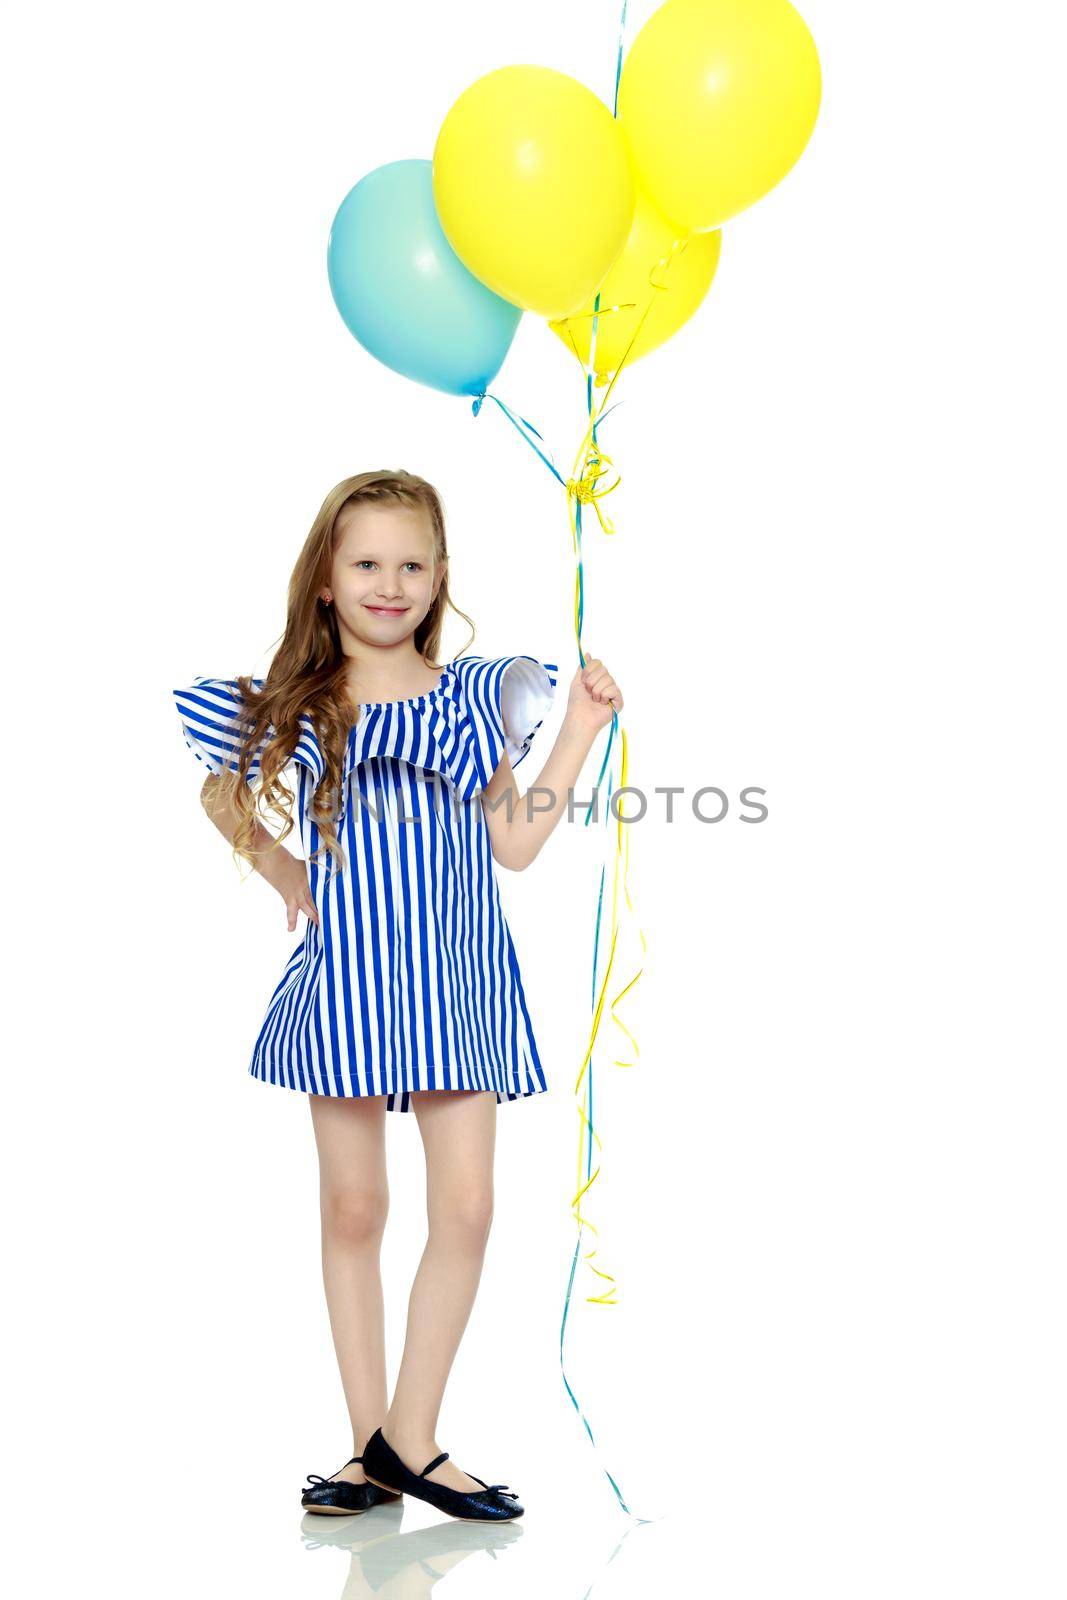 Adorable little blond girl in very short summer striped dress.She holds multicolored balloons in her hand.Isolated on white background.